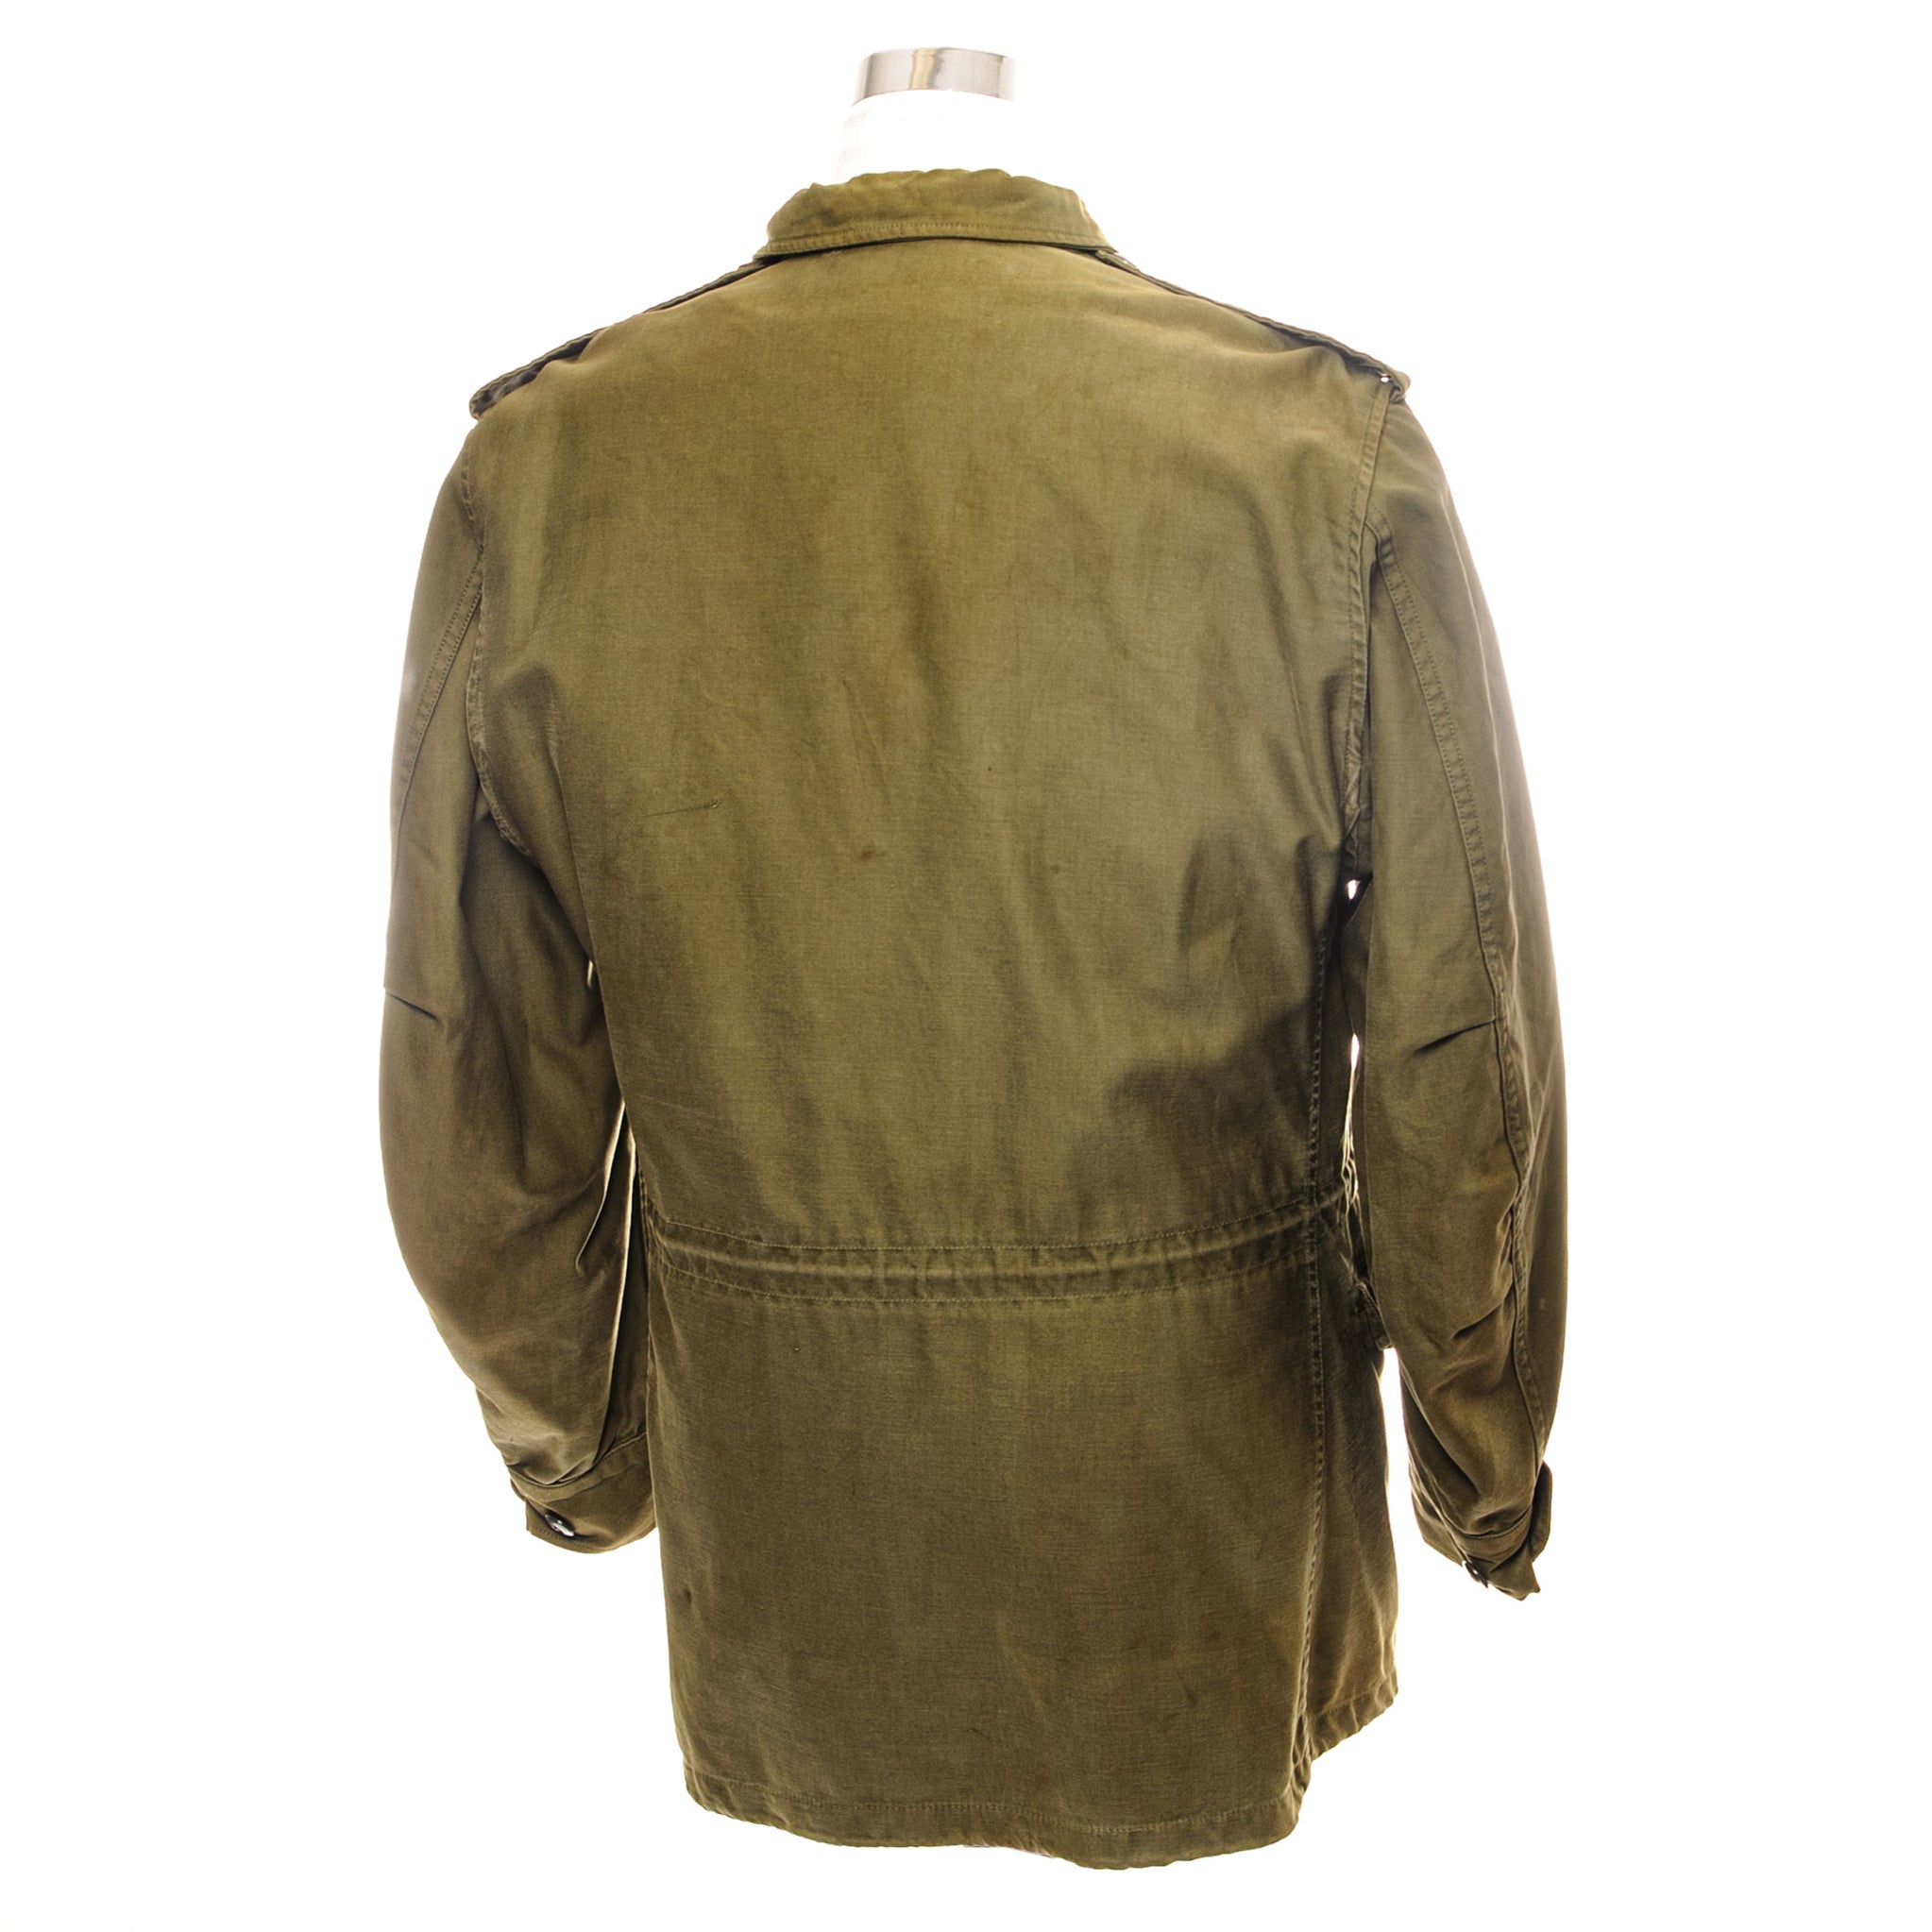 Vintage Army Jacket | VINTAGE US Army Jackets for Sale – Page 3 – Rare ...